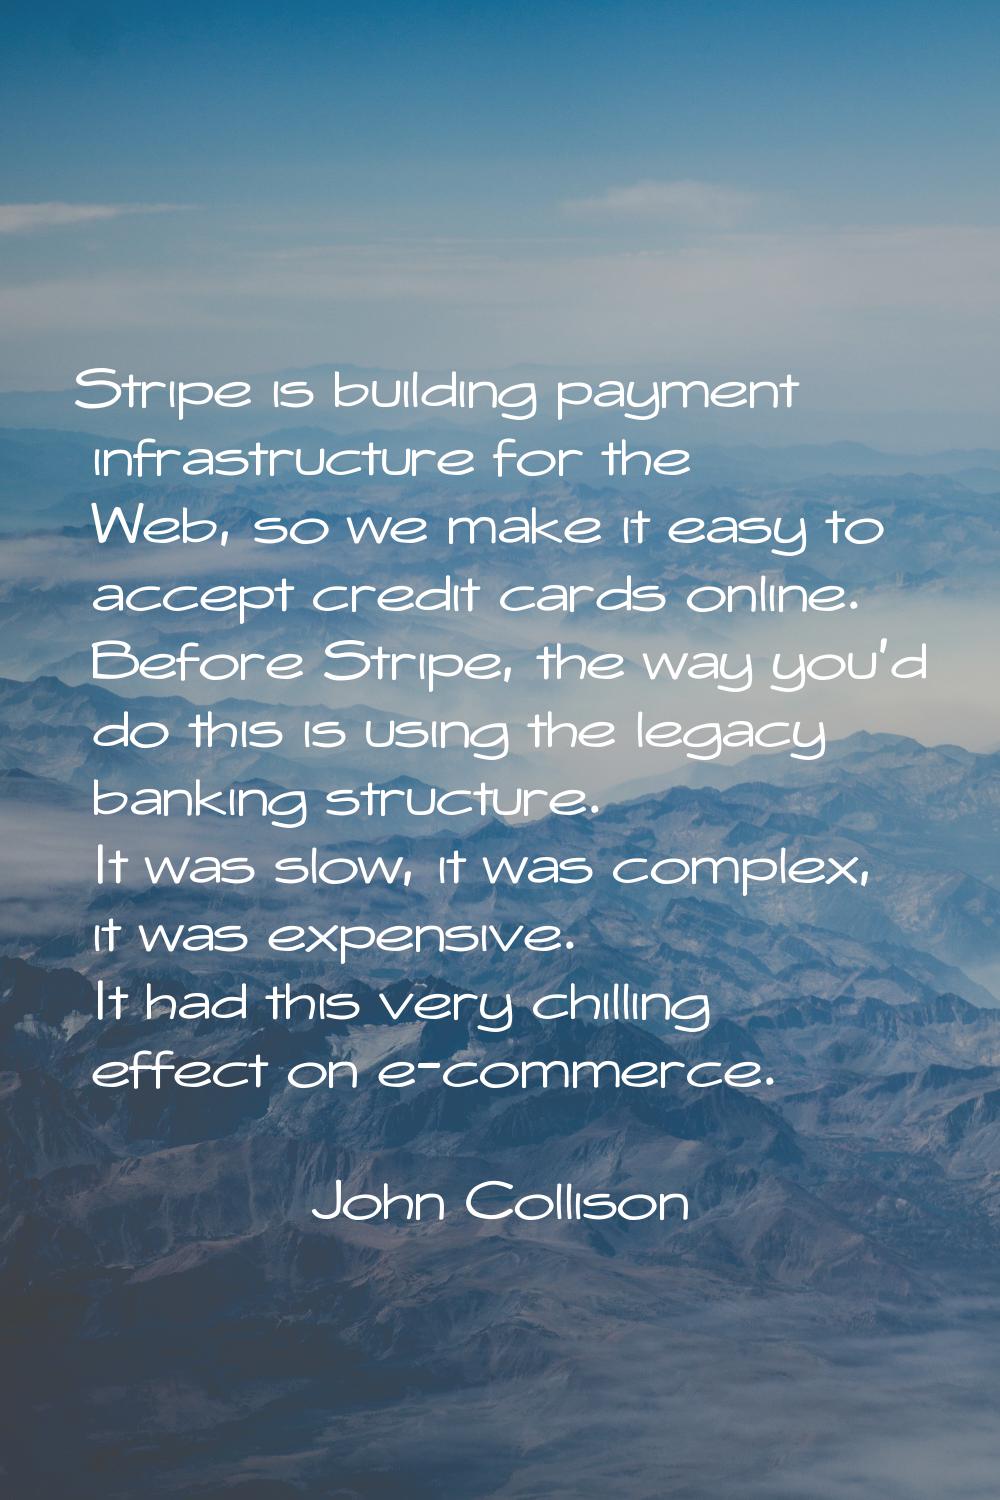 Stripe is building payment infrastructure for the Web, so we make it easy to accept credit cards on